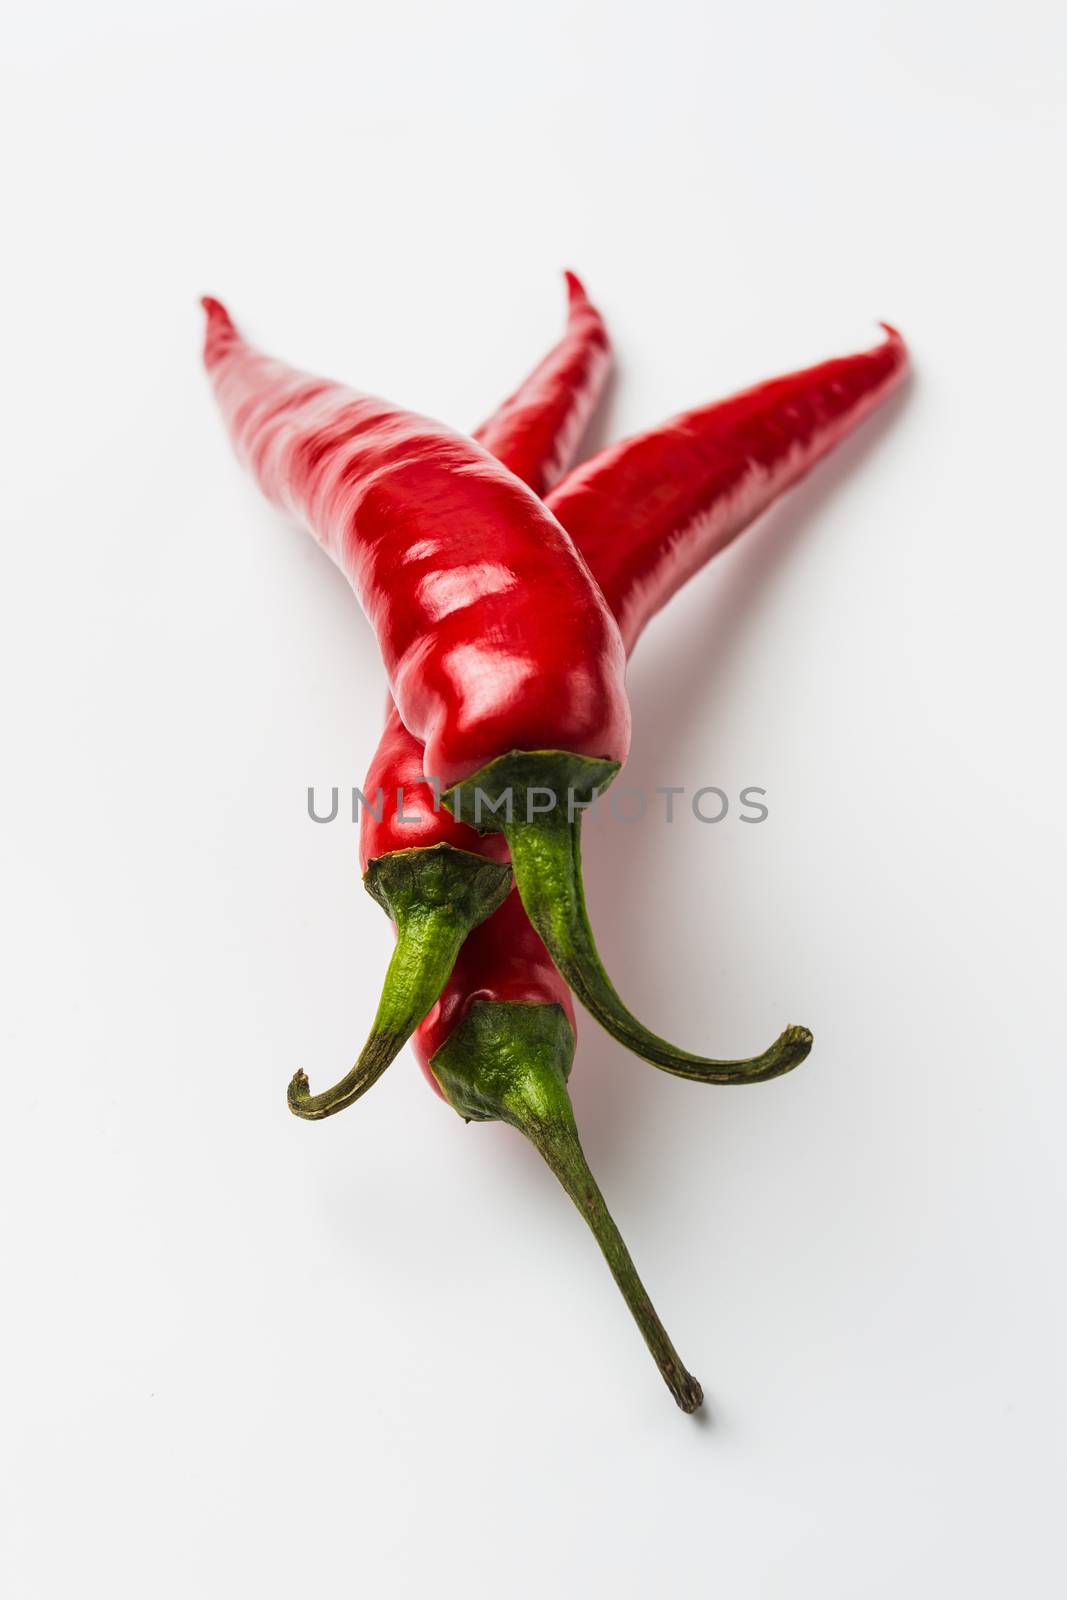 Red chili peppers by oleg_zhukov